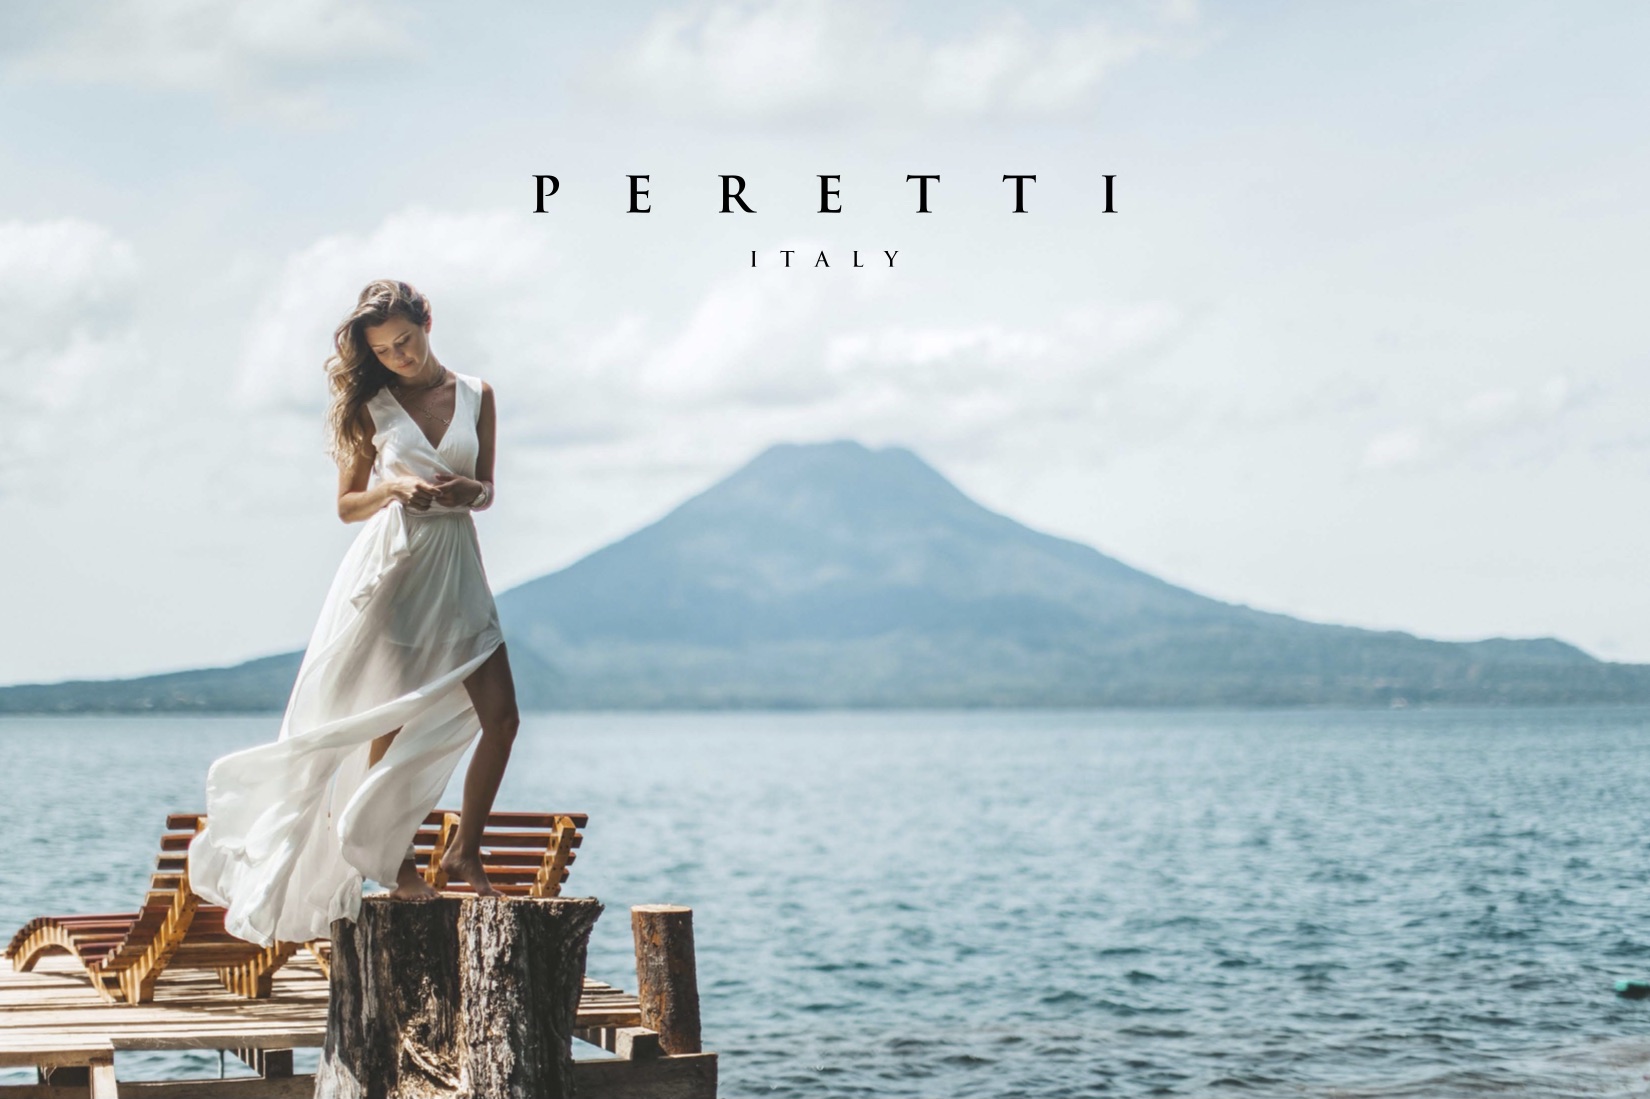 IU Peretti Italy Brand Guidelines Woman in white dress standing on a stump looking down by a pier and water with a mountain in the background